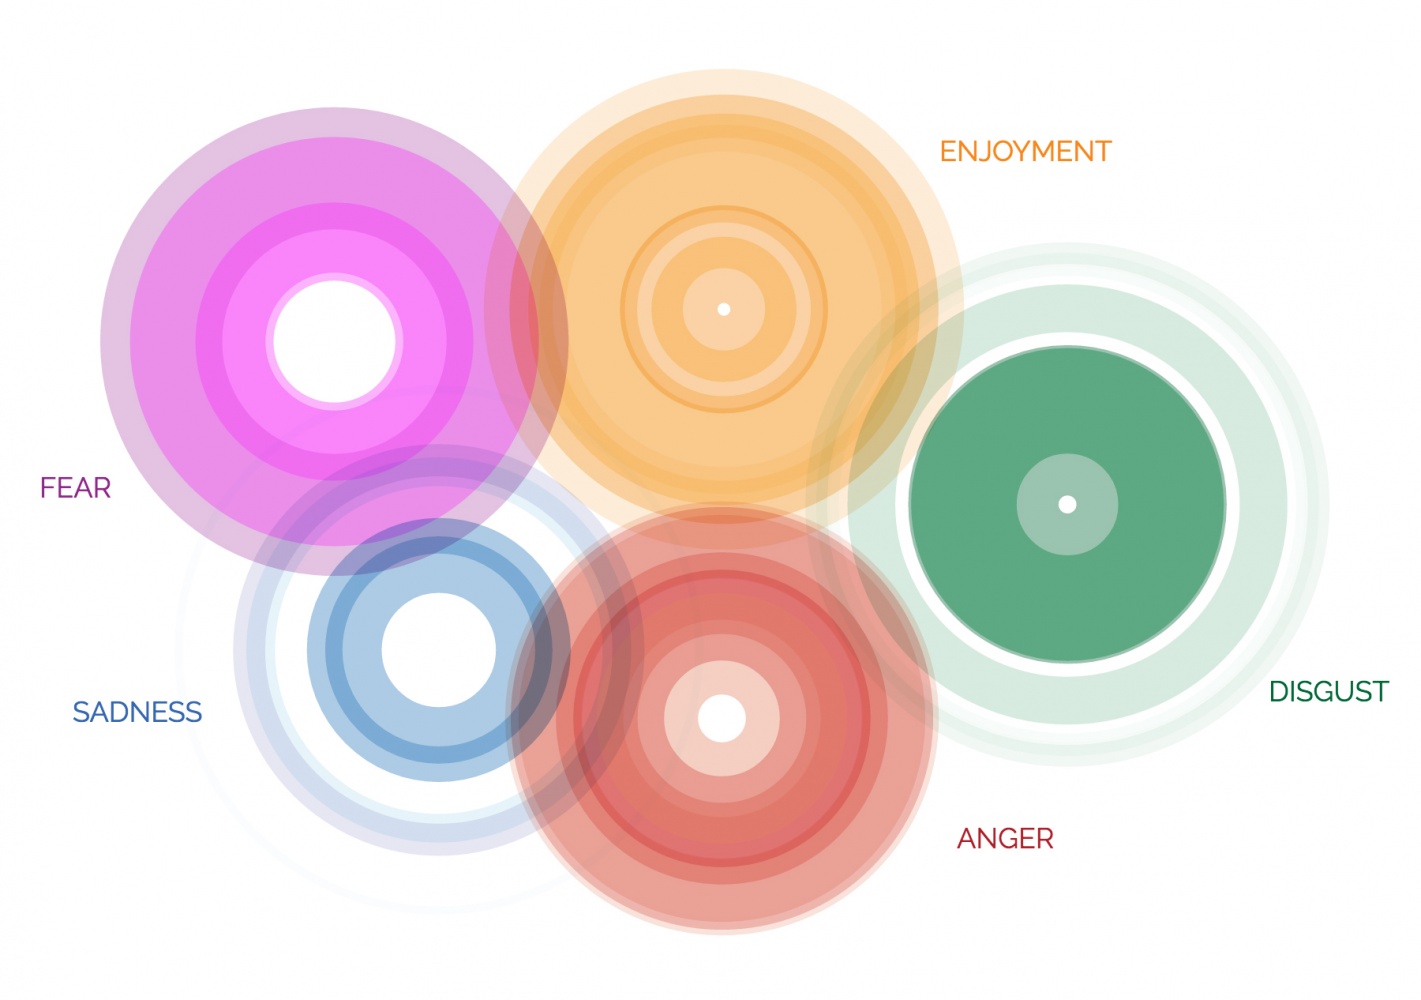 The Atlas of Emotions